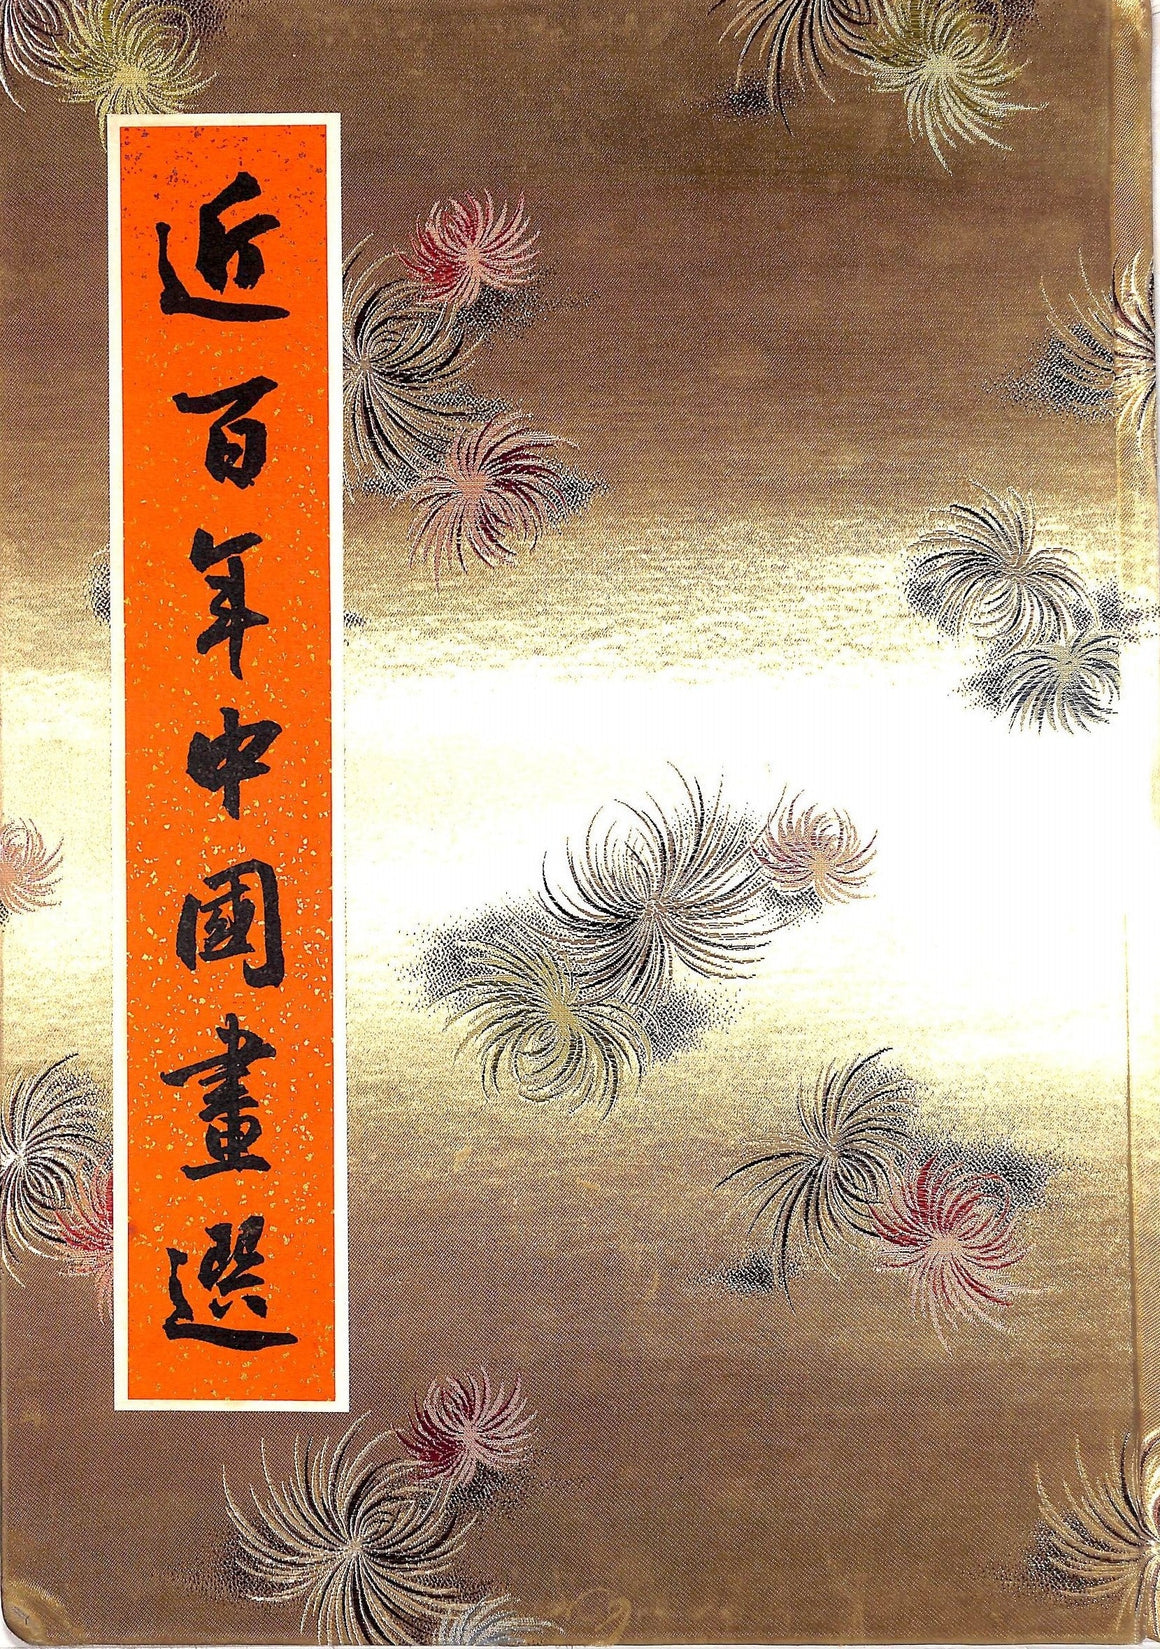 "One Hundred Years of Chinese Painting"